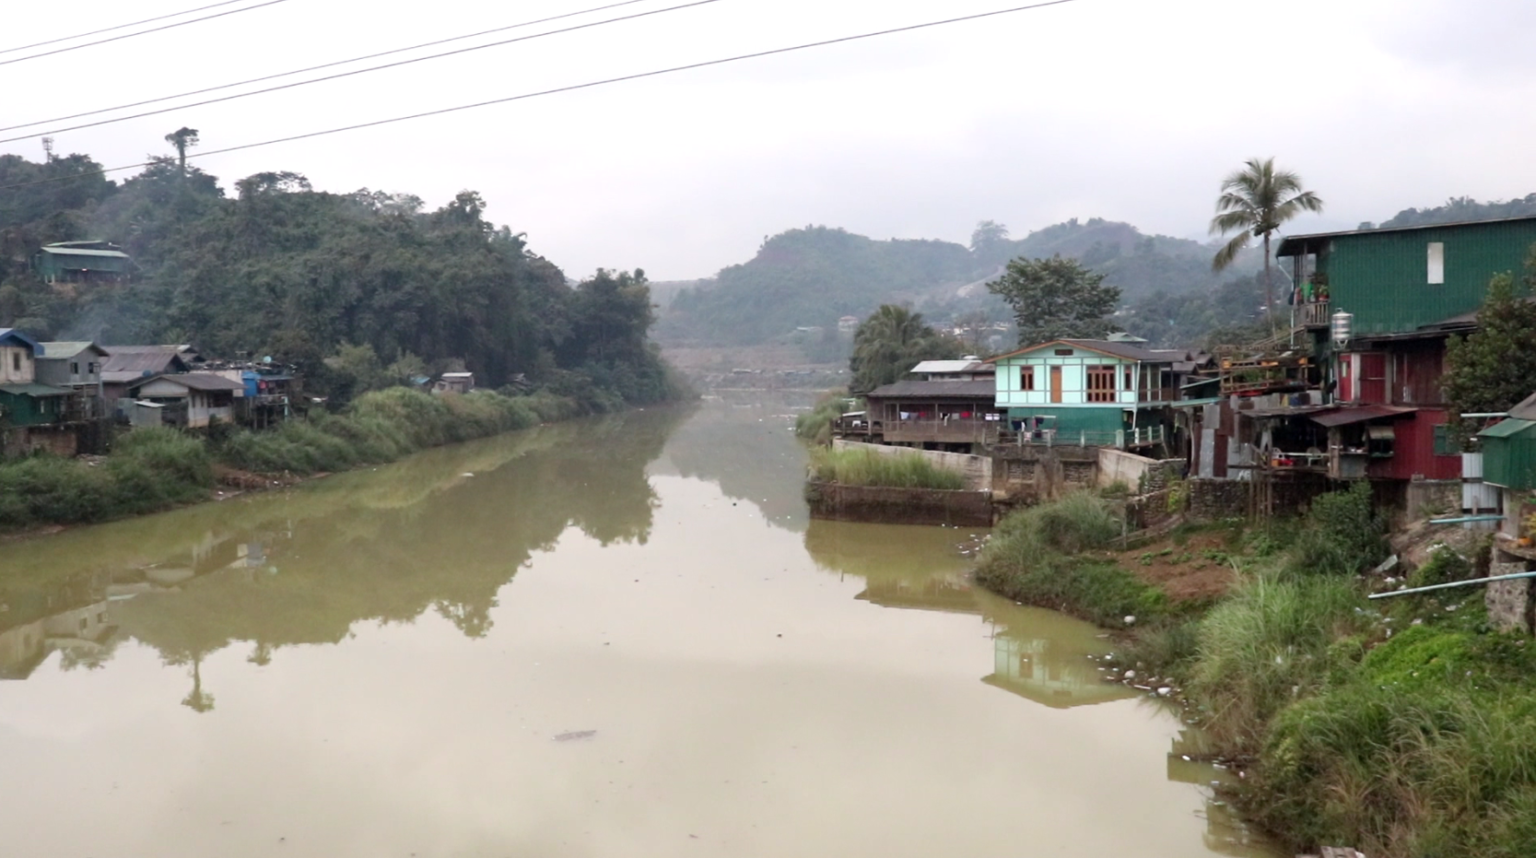 Hpakant Locals Call Annual Uru Stream Flooding a ‘Man-Made Disaster’